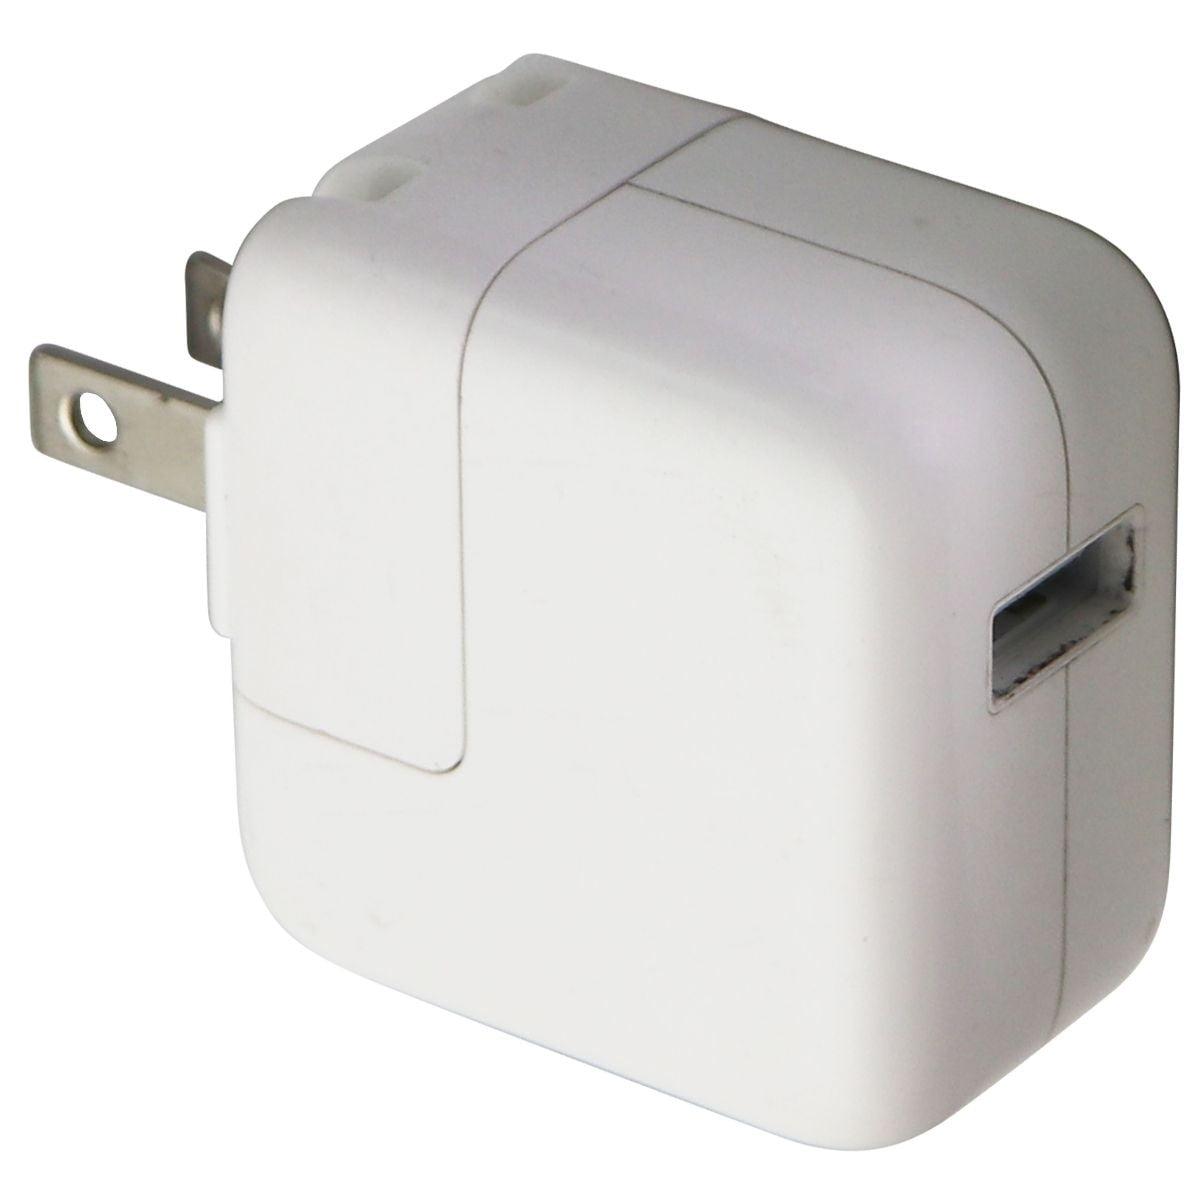 Restored Apple 12W Single USB Wall Charger Power Adapter (MD836LL/A -  A1401) - White (Refurbished)